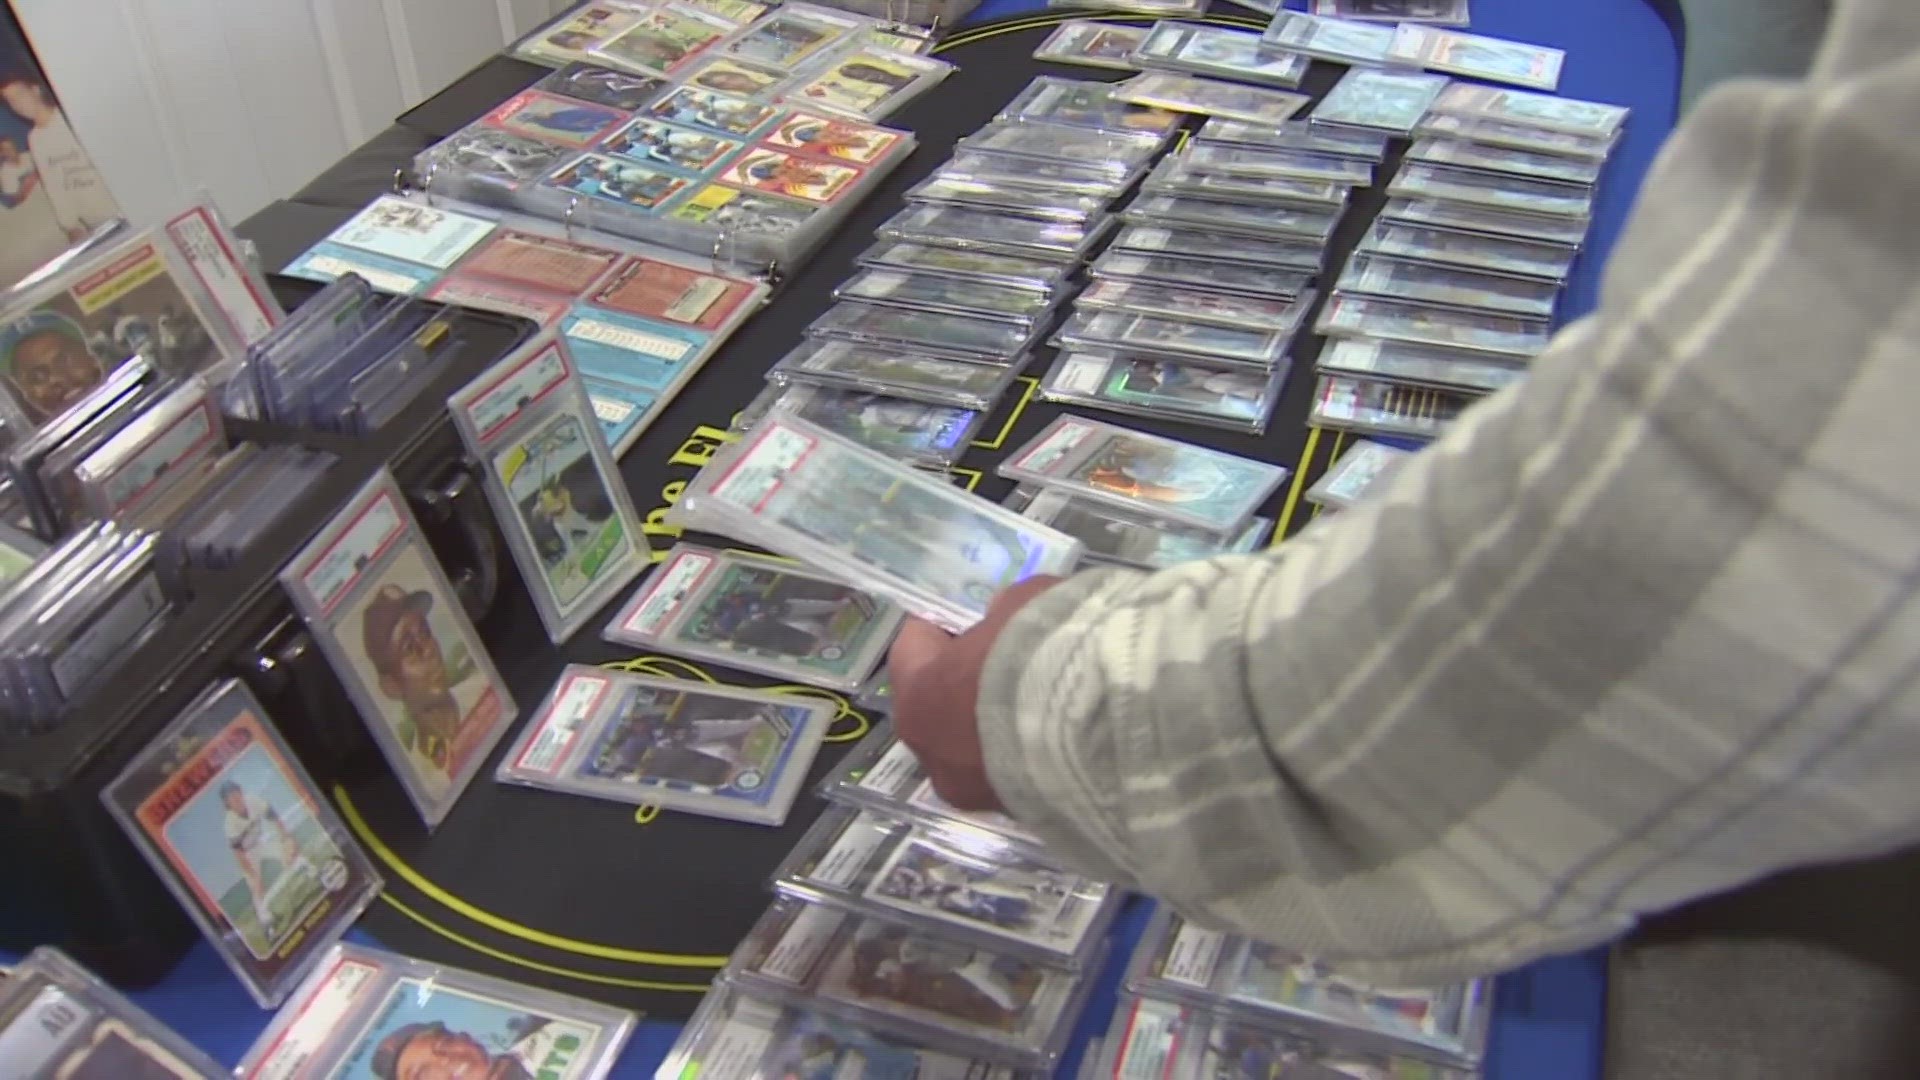 Justin Skogen has a collection that he said tops 500,000 cards. Now his passion has become a family business.